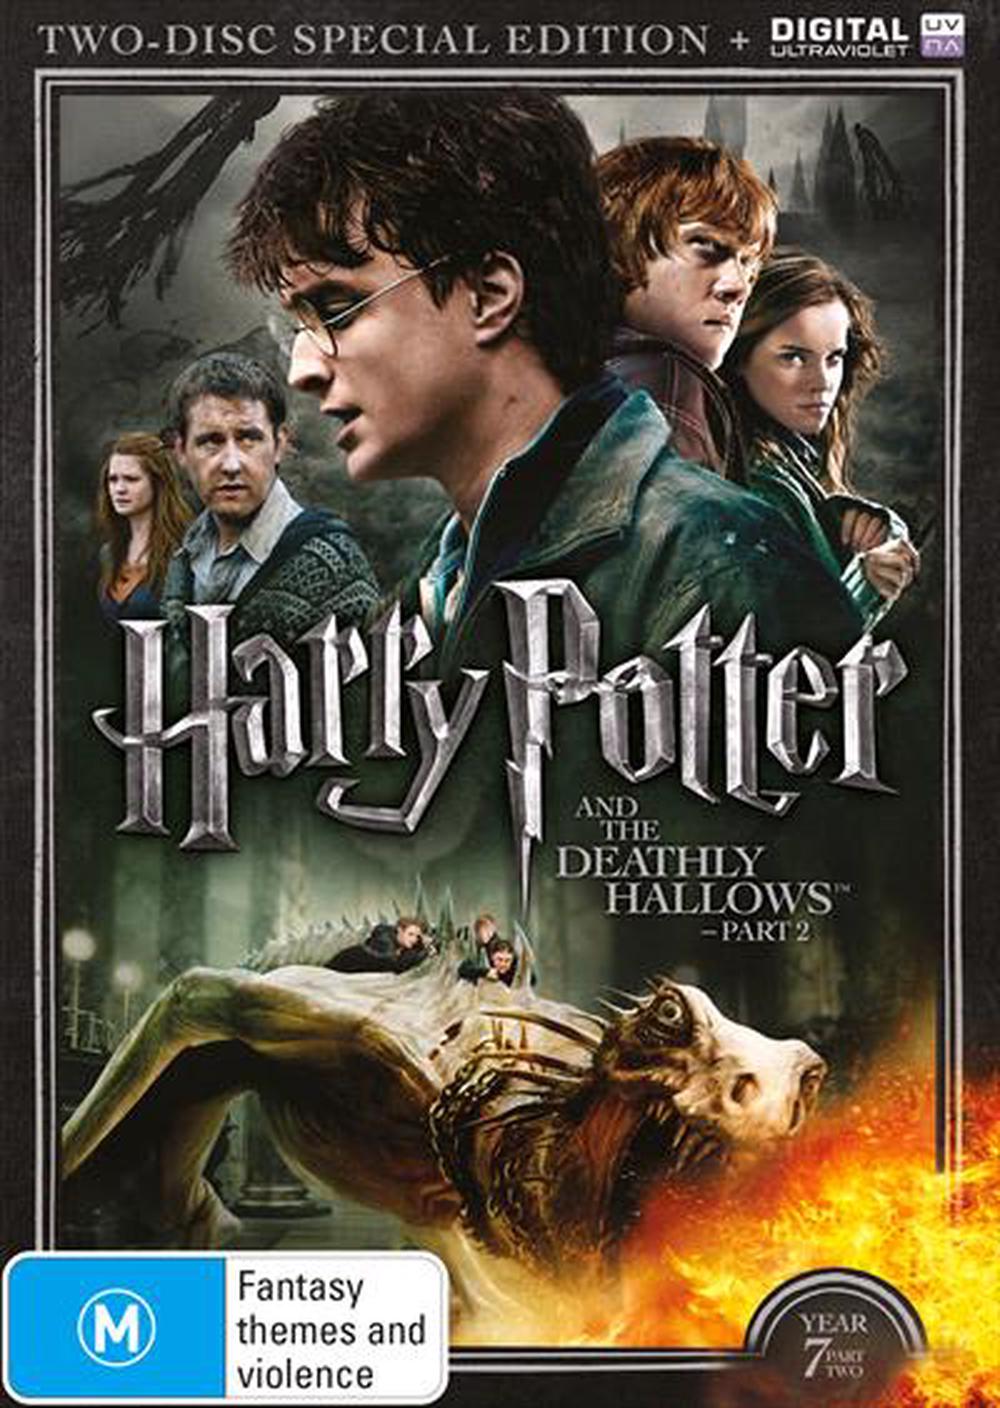 Harry potter deathly hallows part 1 online